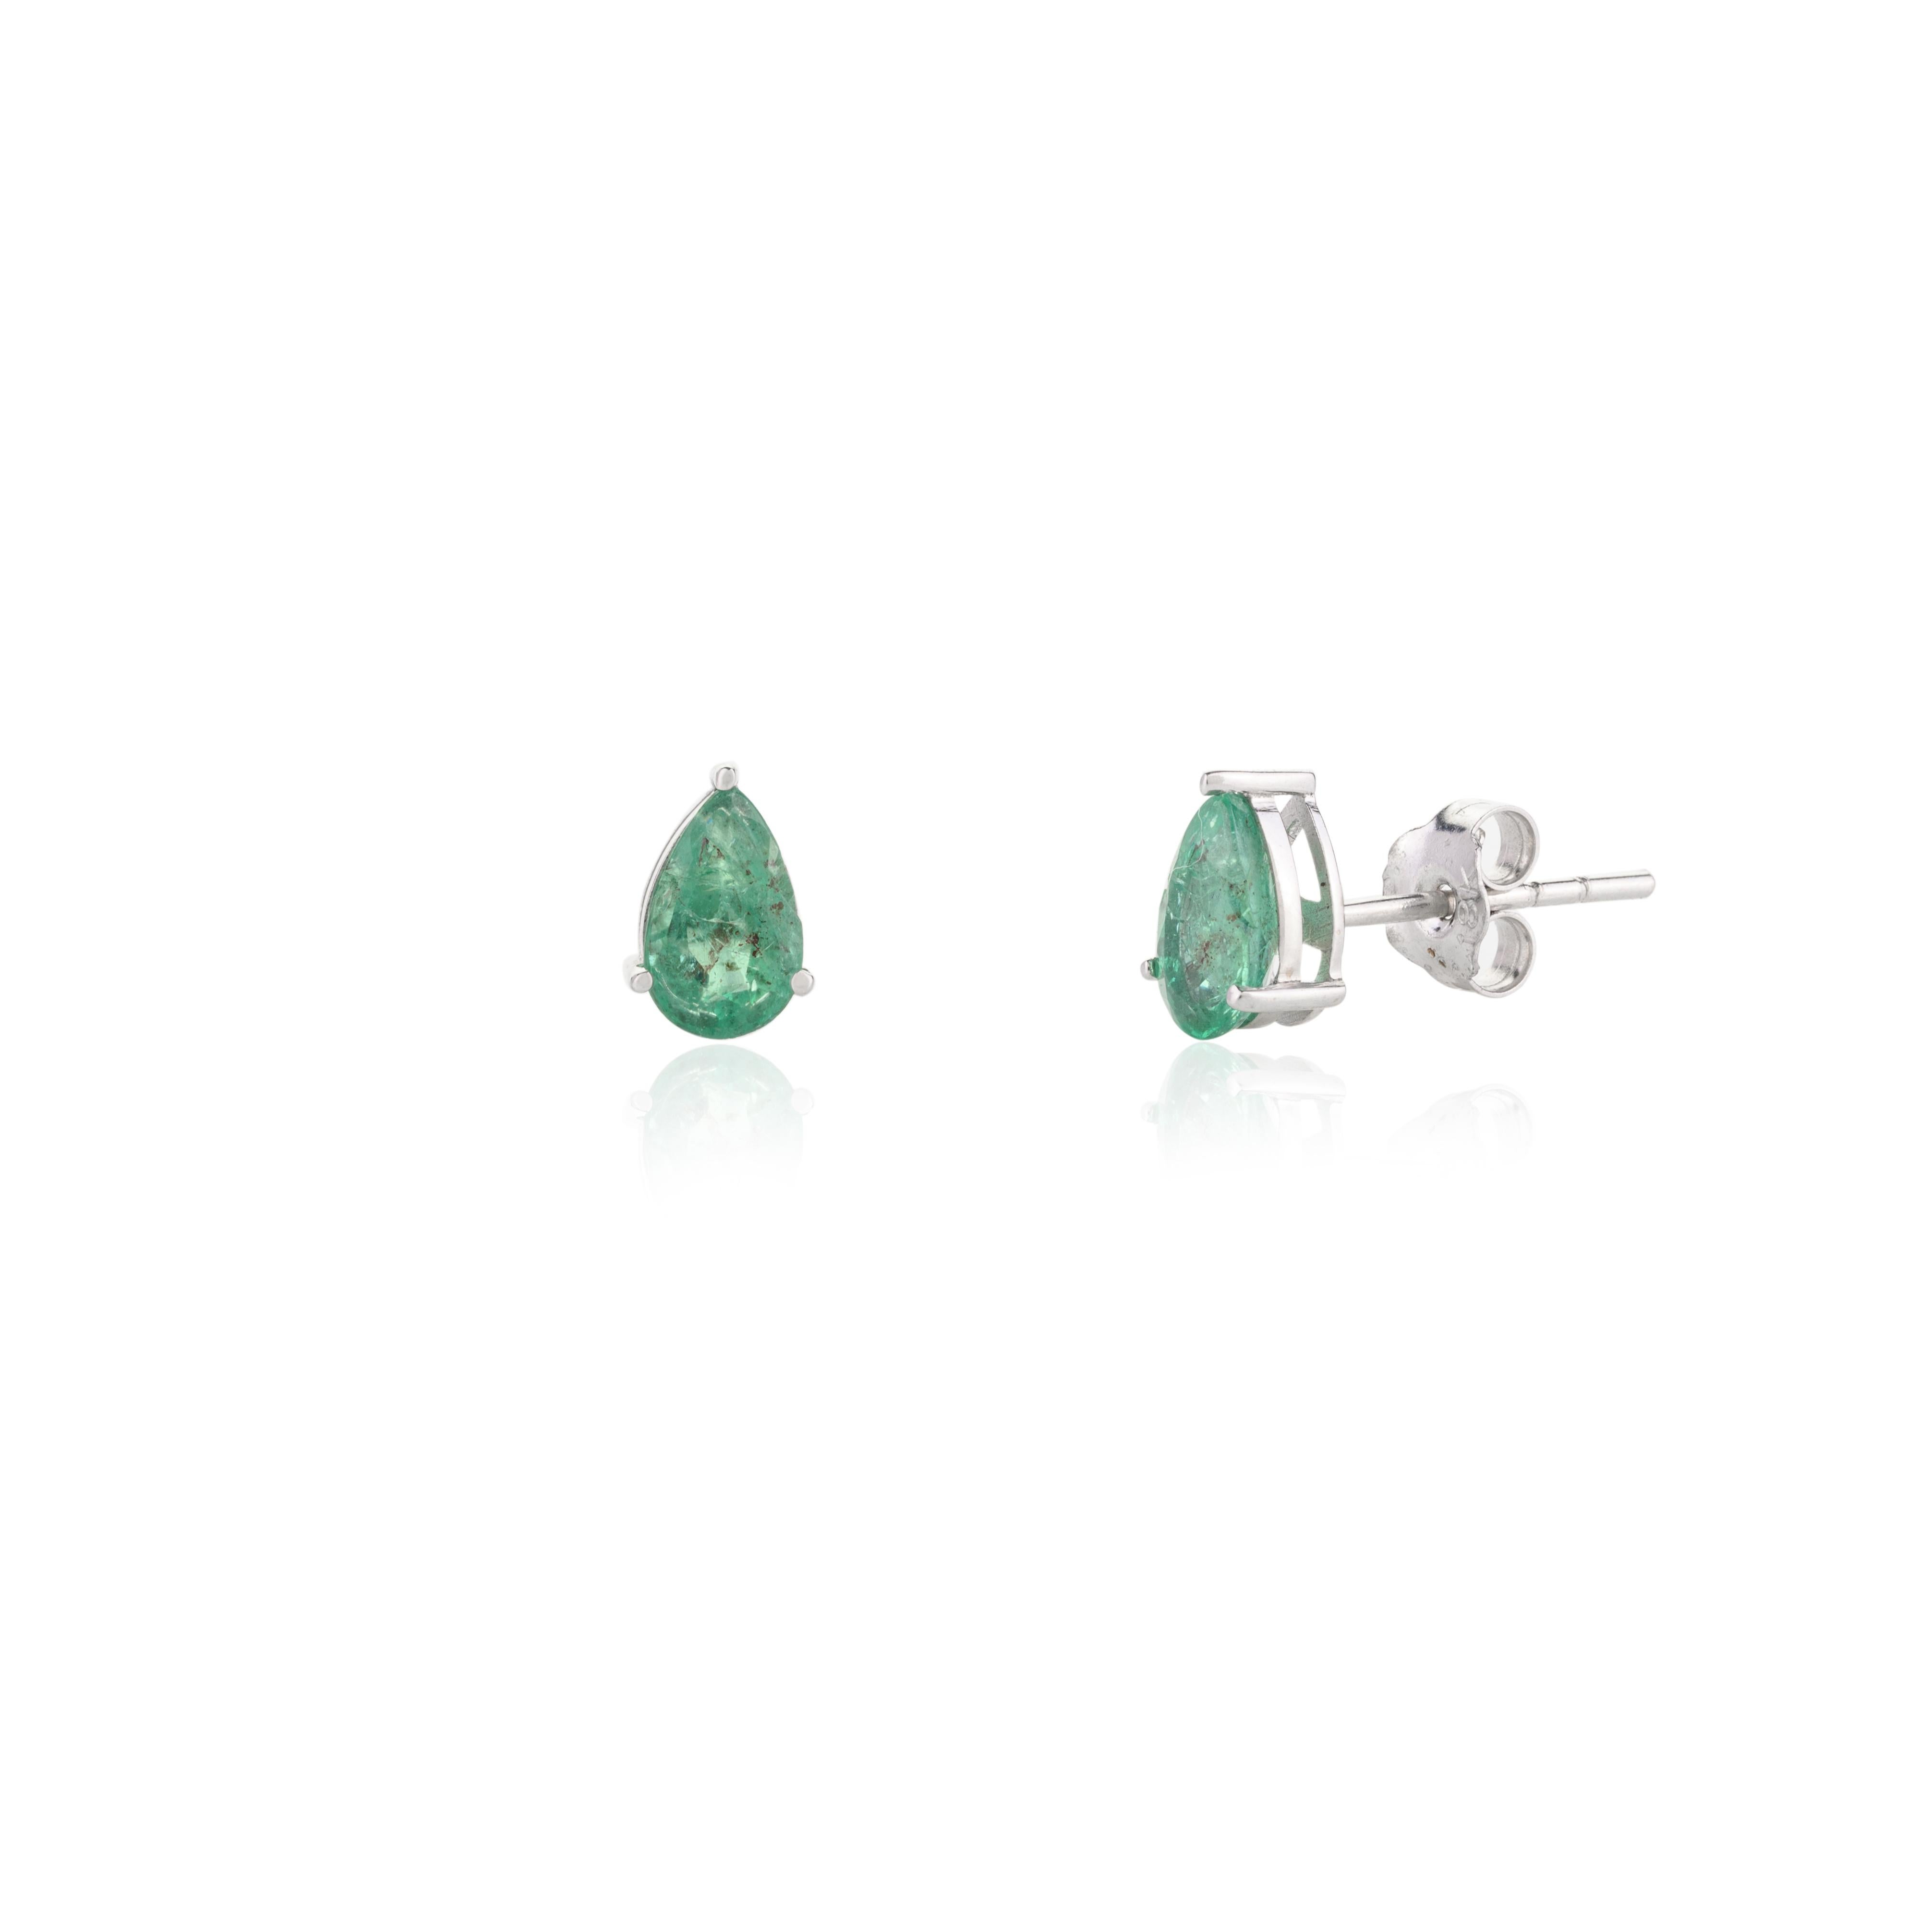 For Sale:  Dainty Emerald Ring and Earrings Jewelry Set Made in 18k Solid White Gold 5